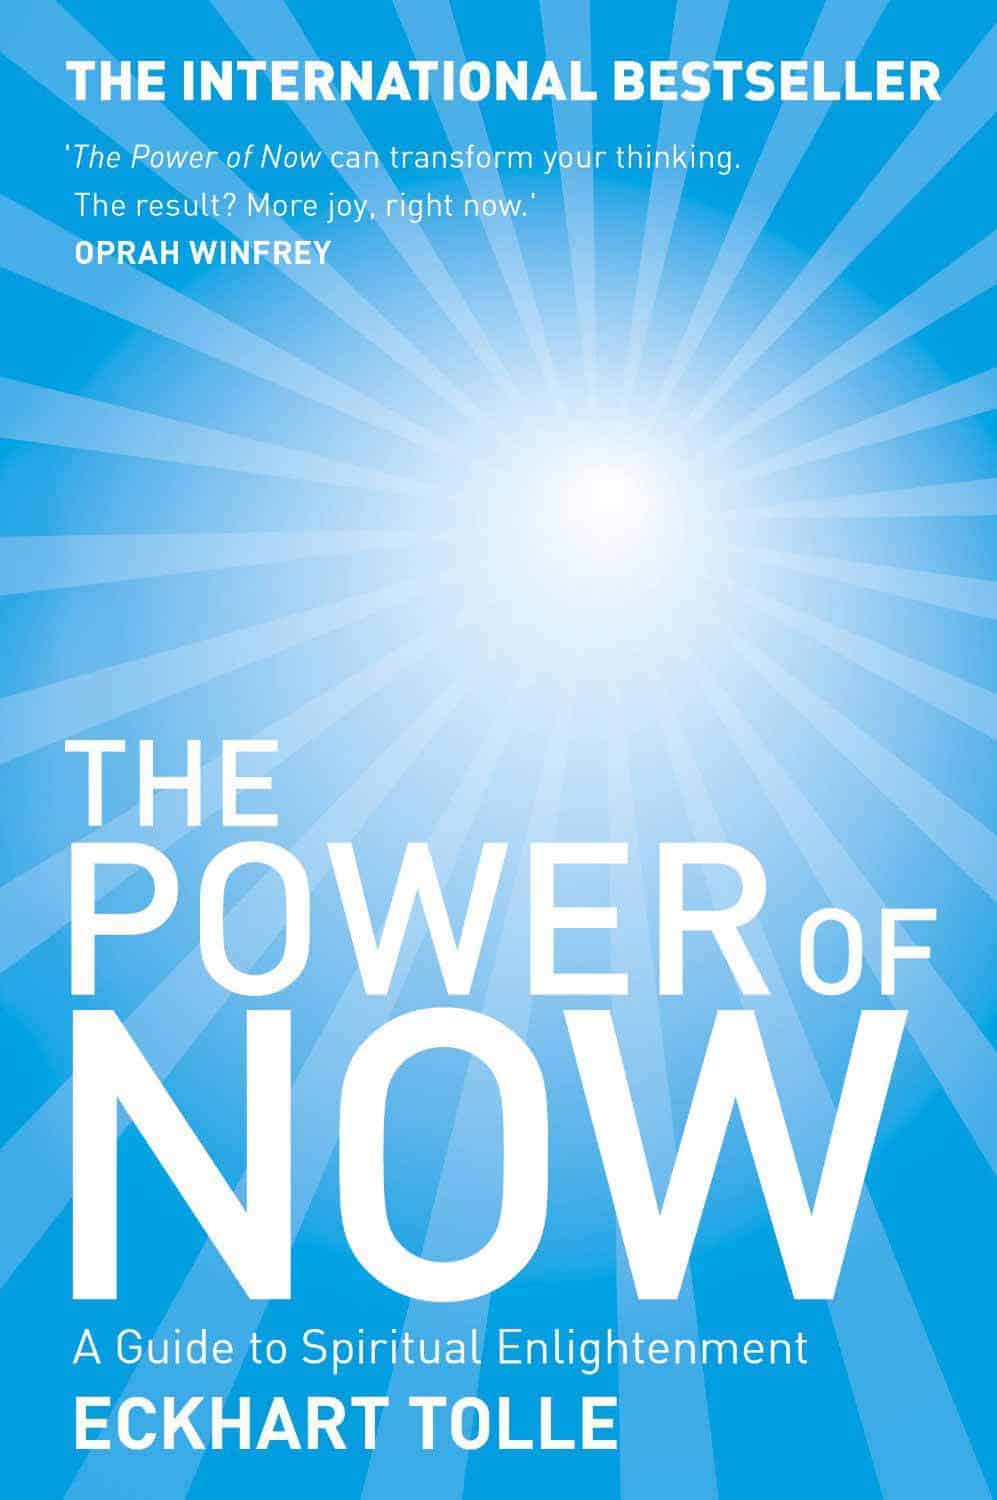 The Power of Now by Eckhart Tolle - Personal Development book